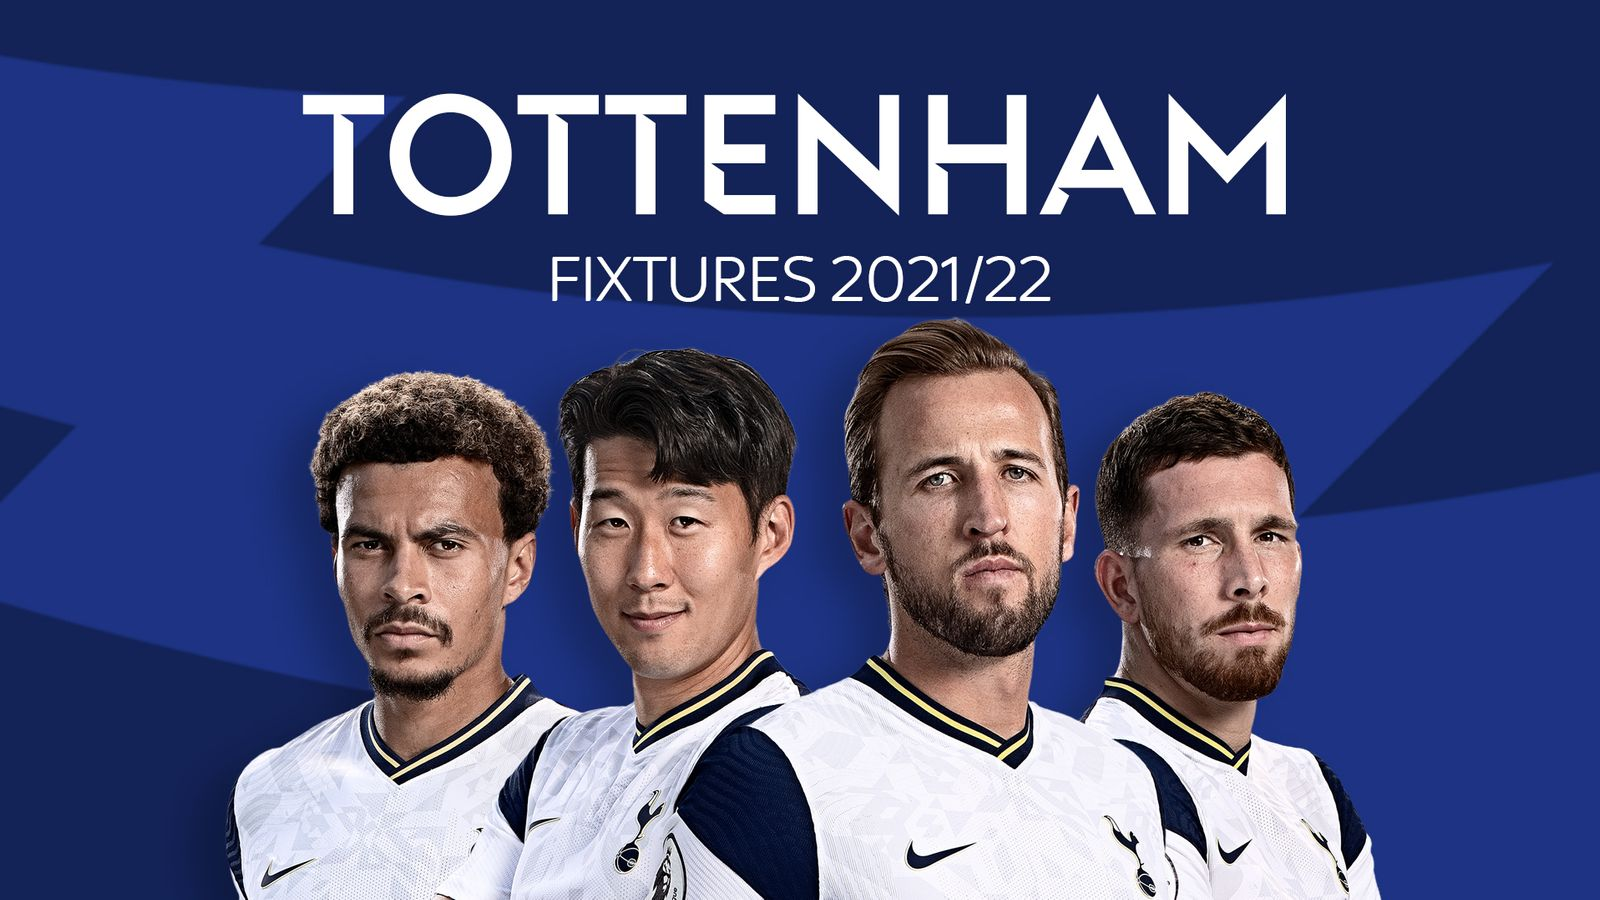 Tottenham Premier League 2021-22: Fixtures and Match Schedules in Full